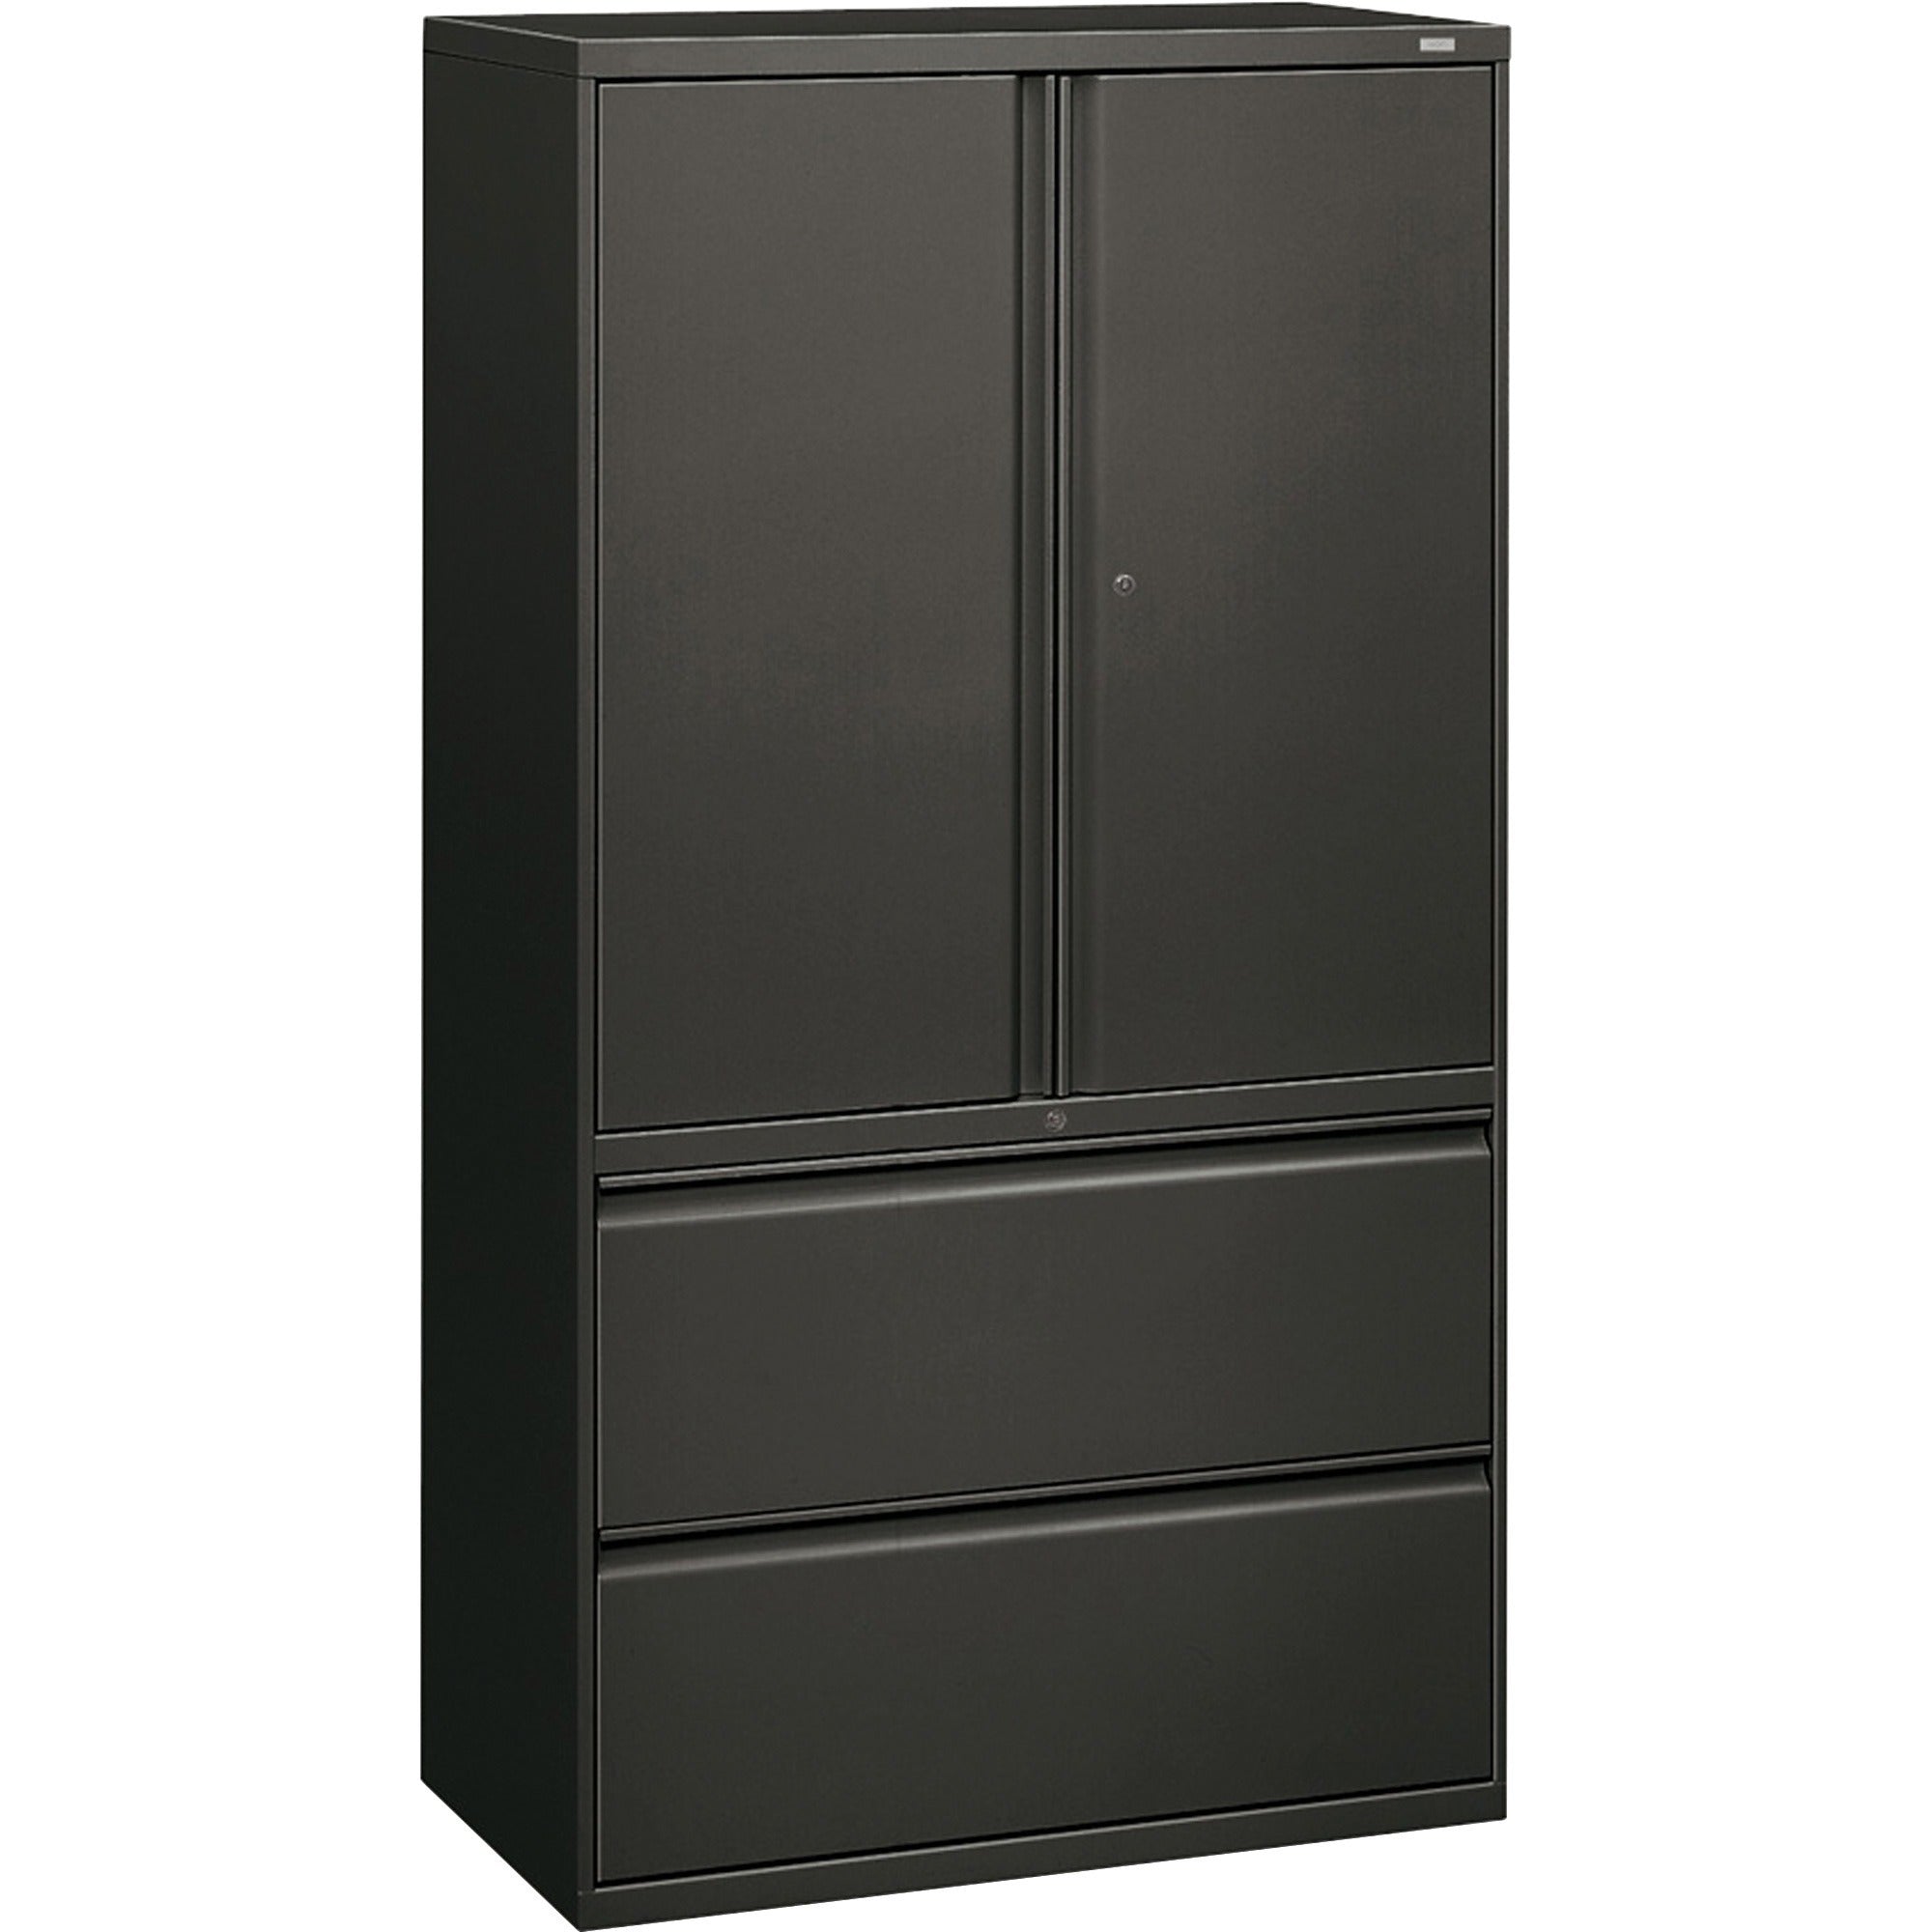 HON Brigade 800 H885LS Lateral File - 36" x 18"67" - 2 Drawer(s) - 3 Shelve(s) - Finish: Charcoal - 